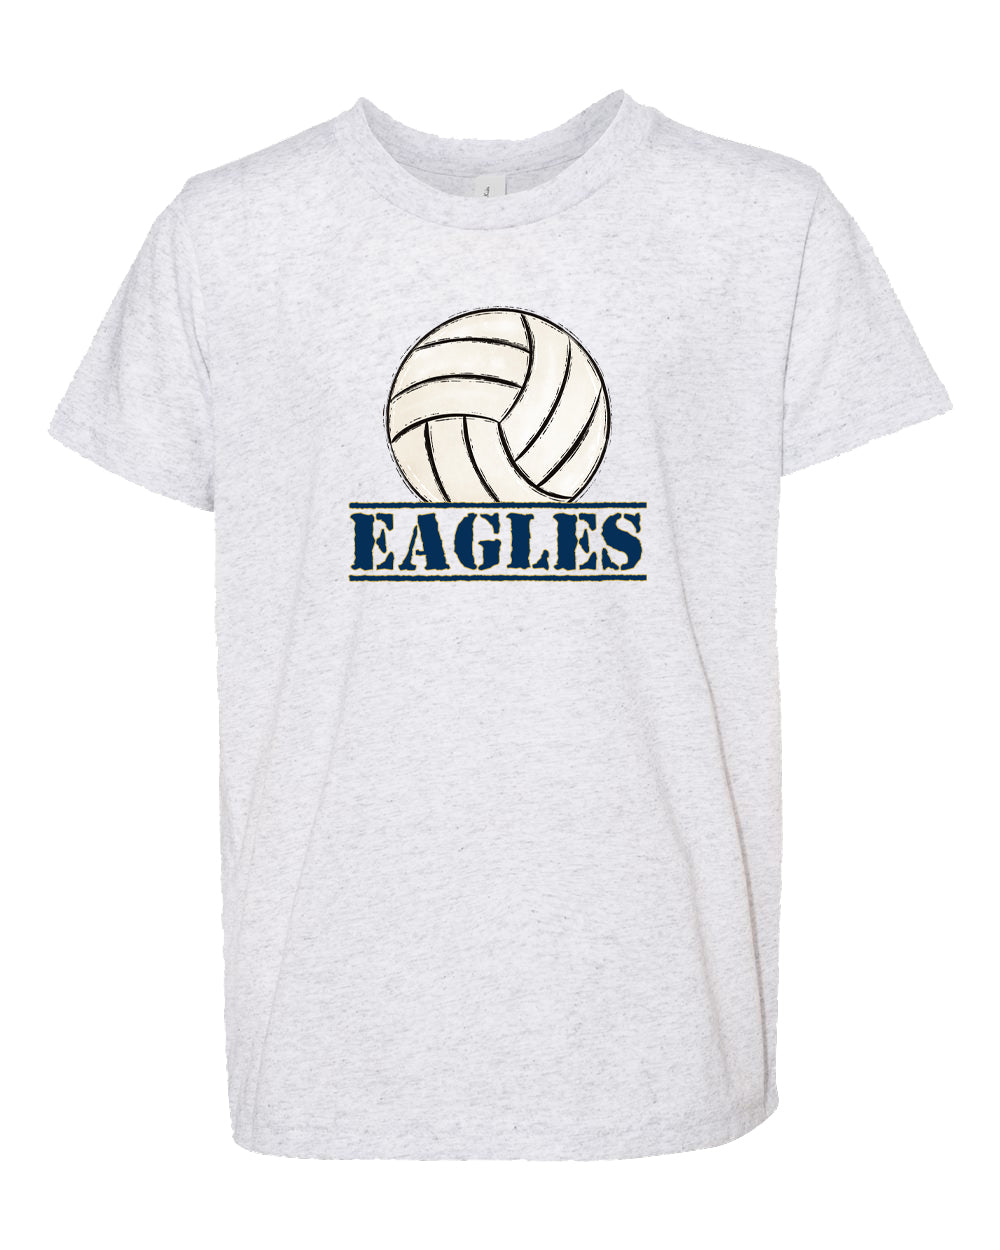 Youth Eagles volleyball Short Sleeve Tee